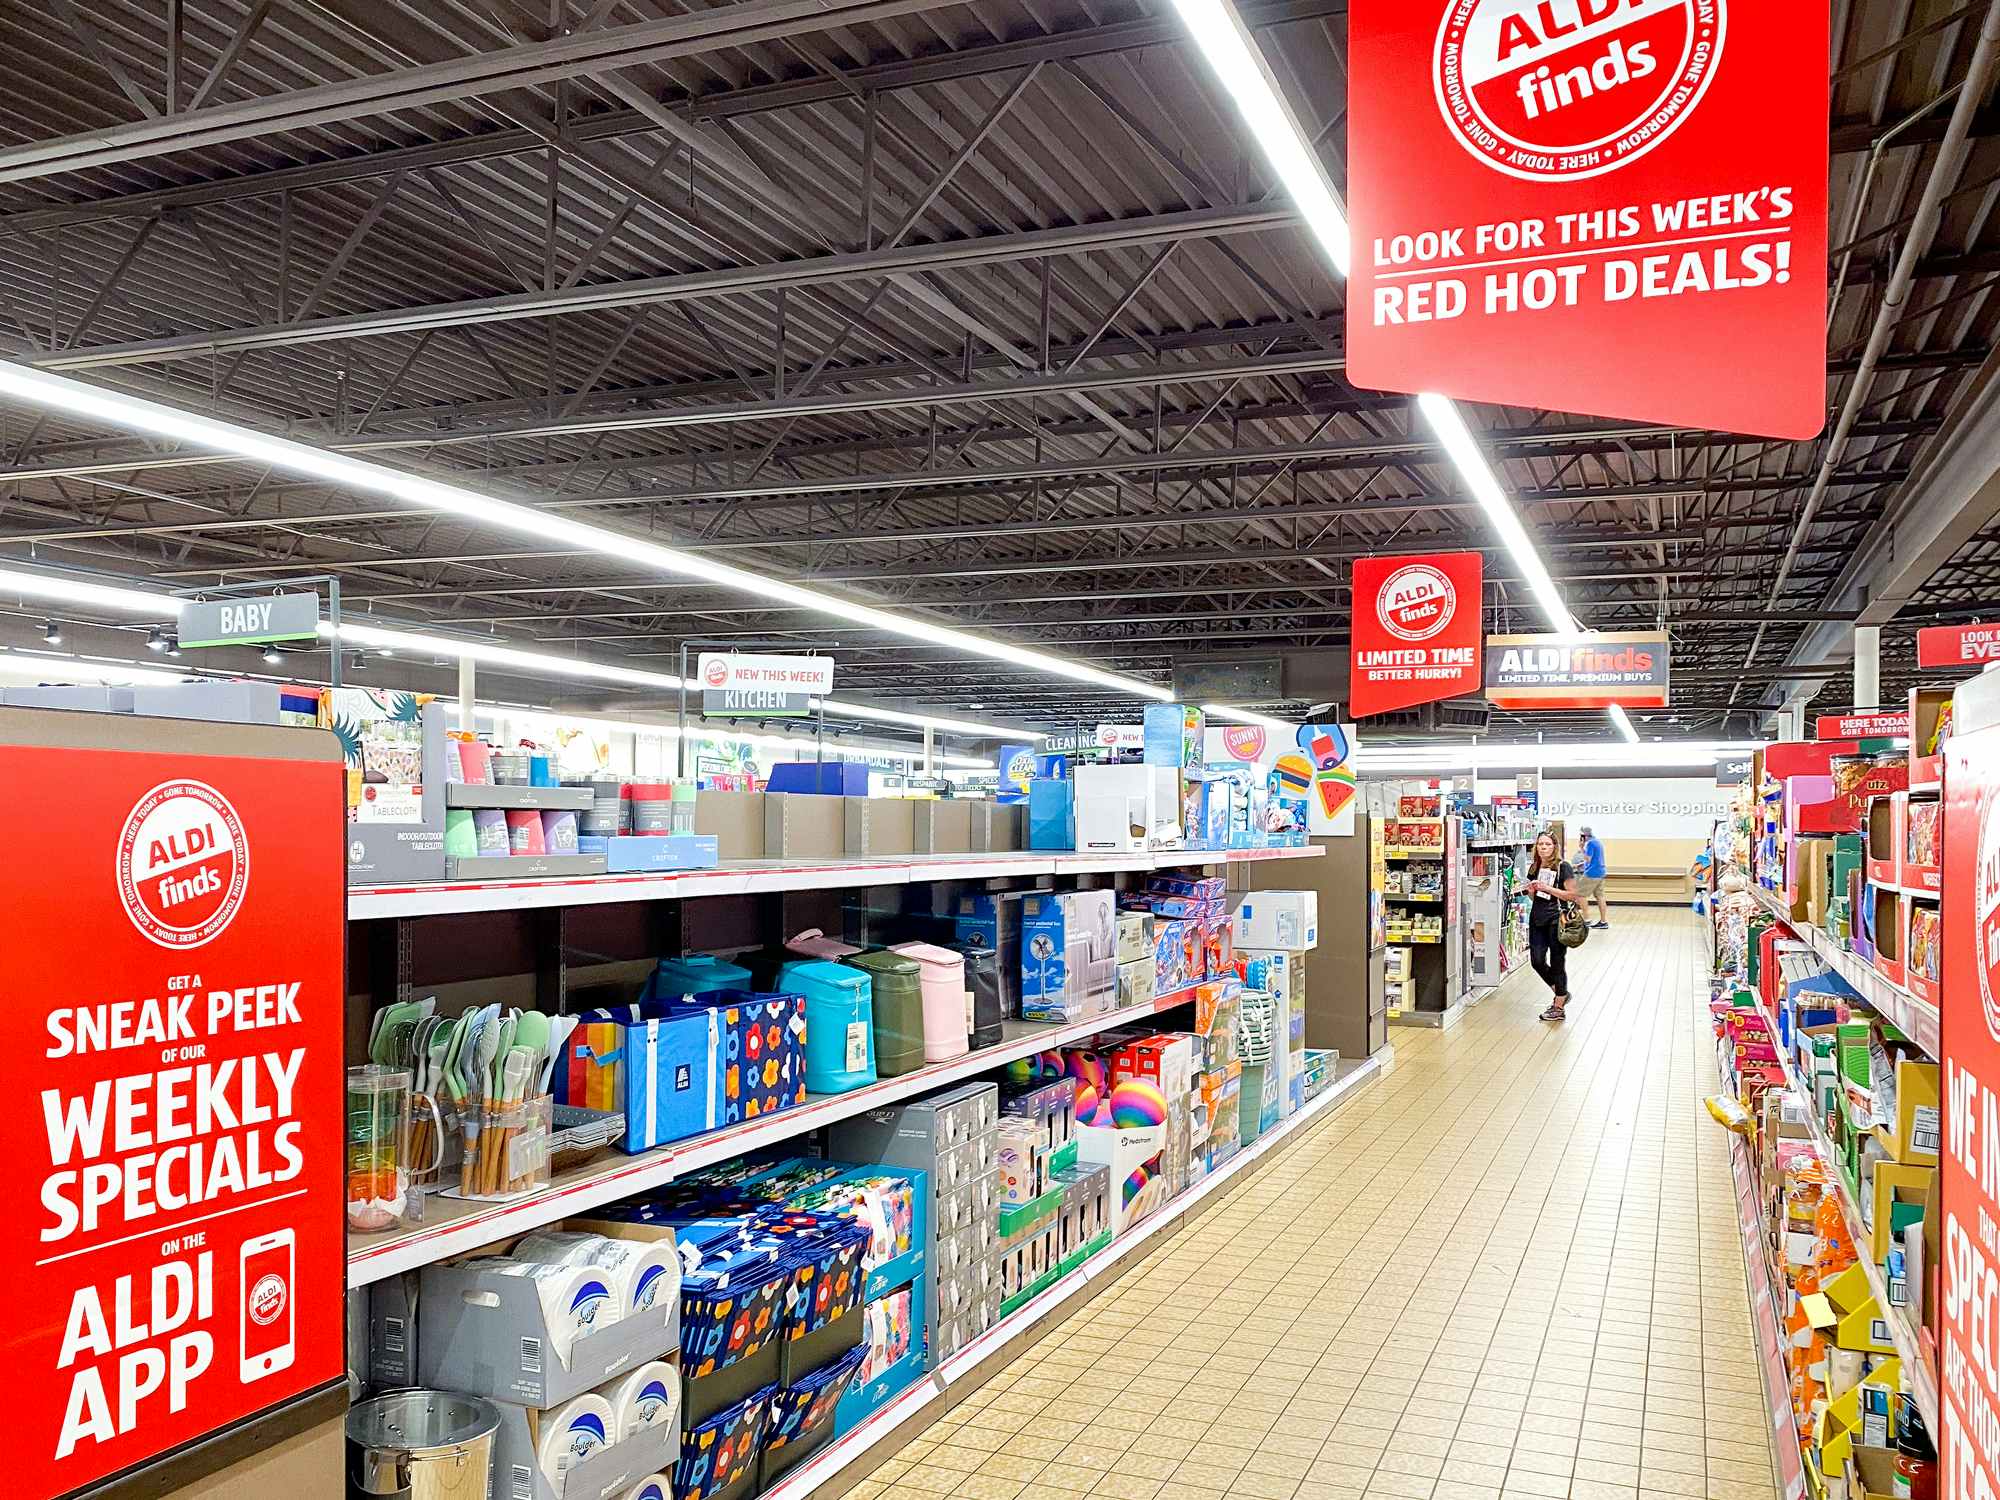 summer 2023 aldi finds aisle with app signage